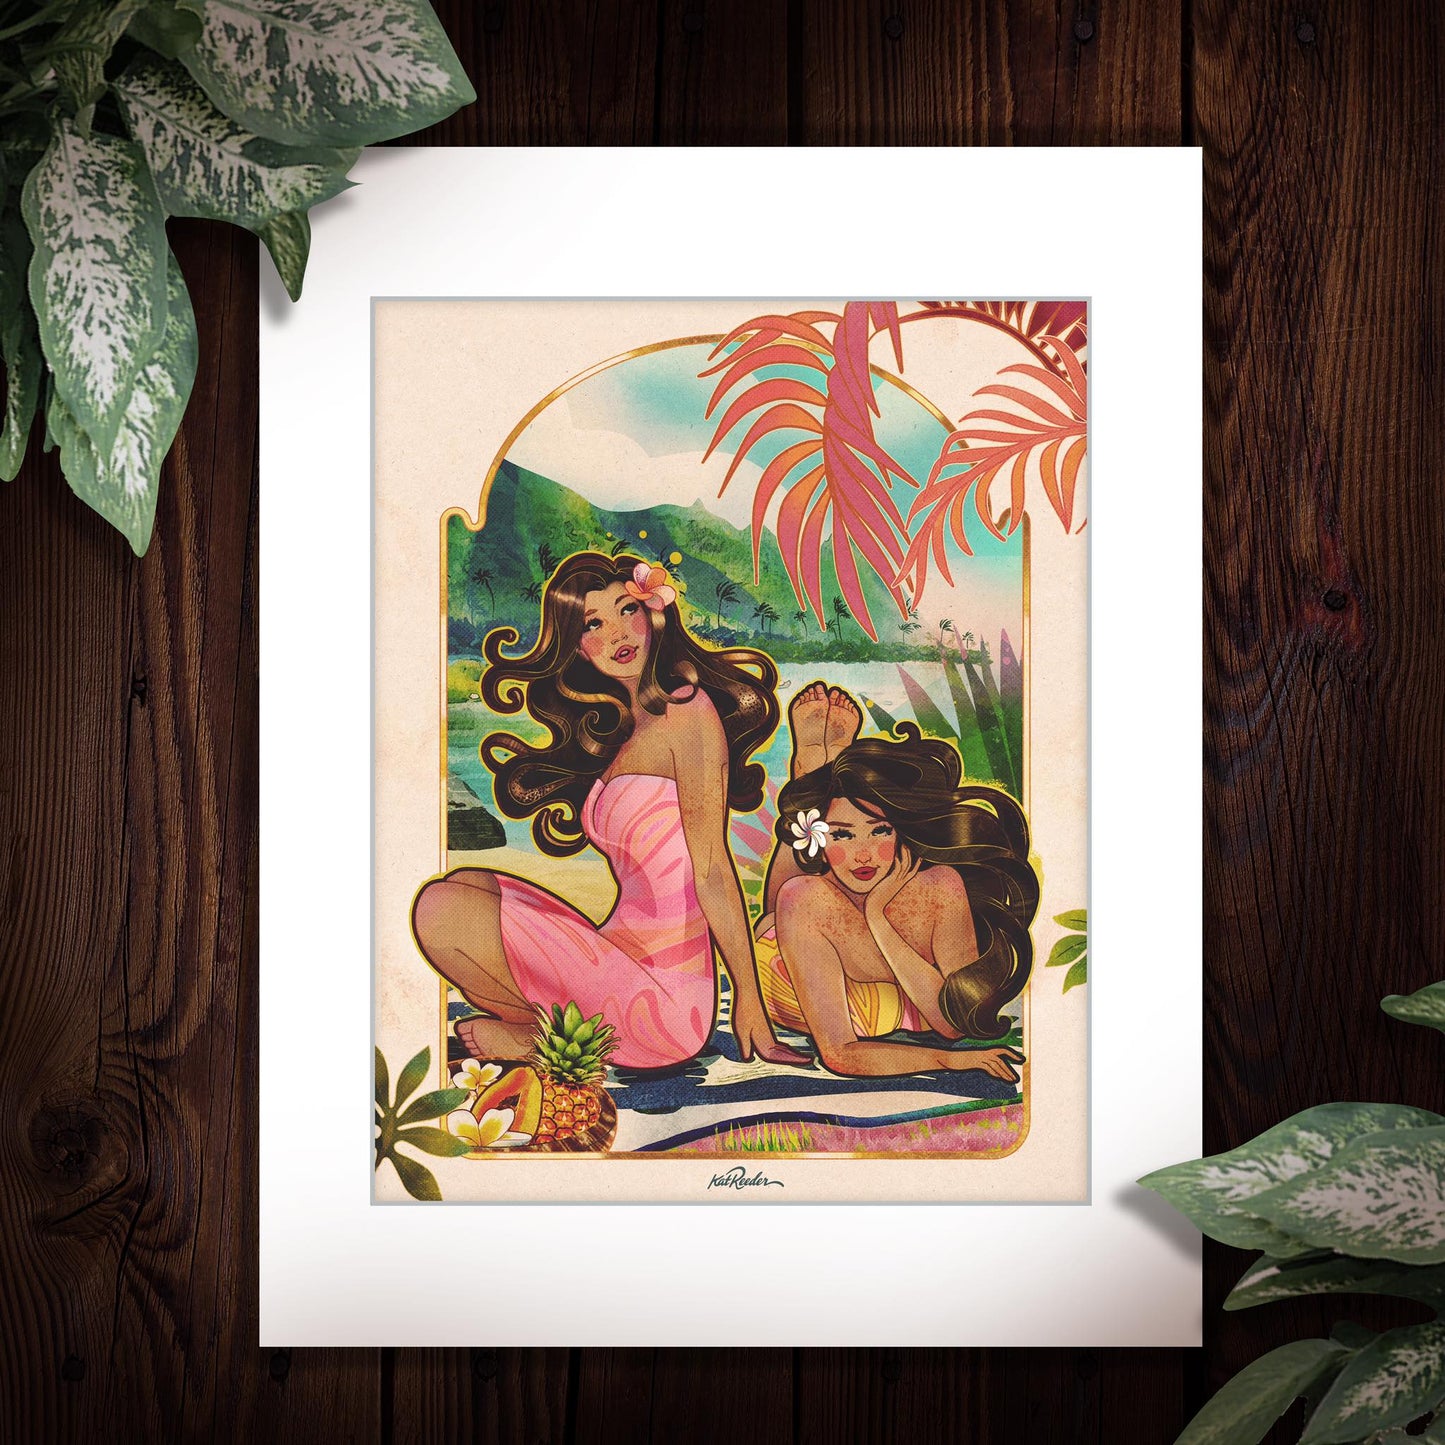 art nouveau illustration of two hawaiian girls, one sexy and one shy, both sitting in a beach with pink palm trees, fruits and mountain views